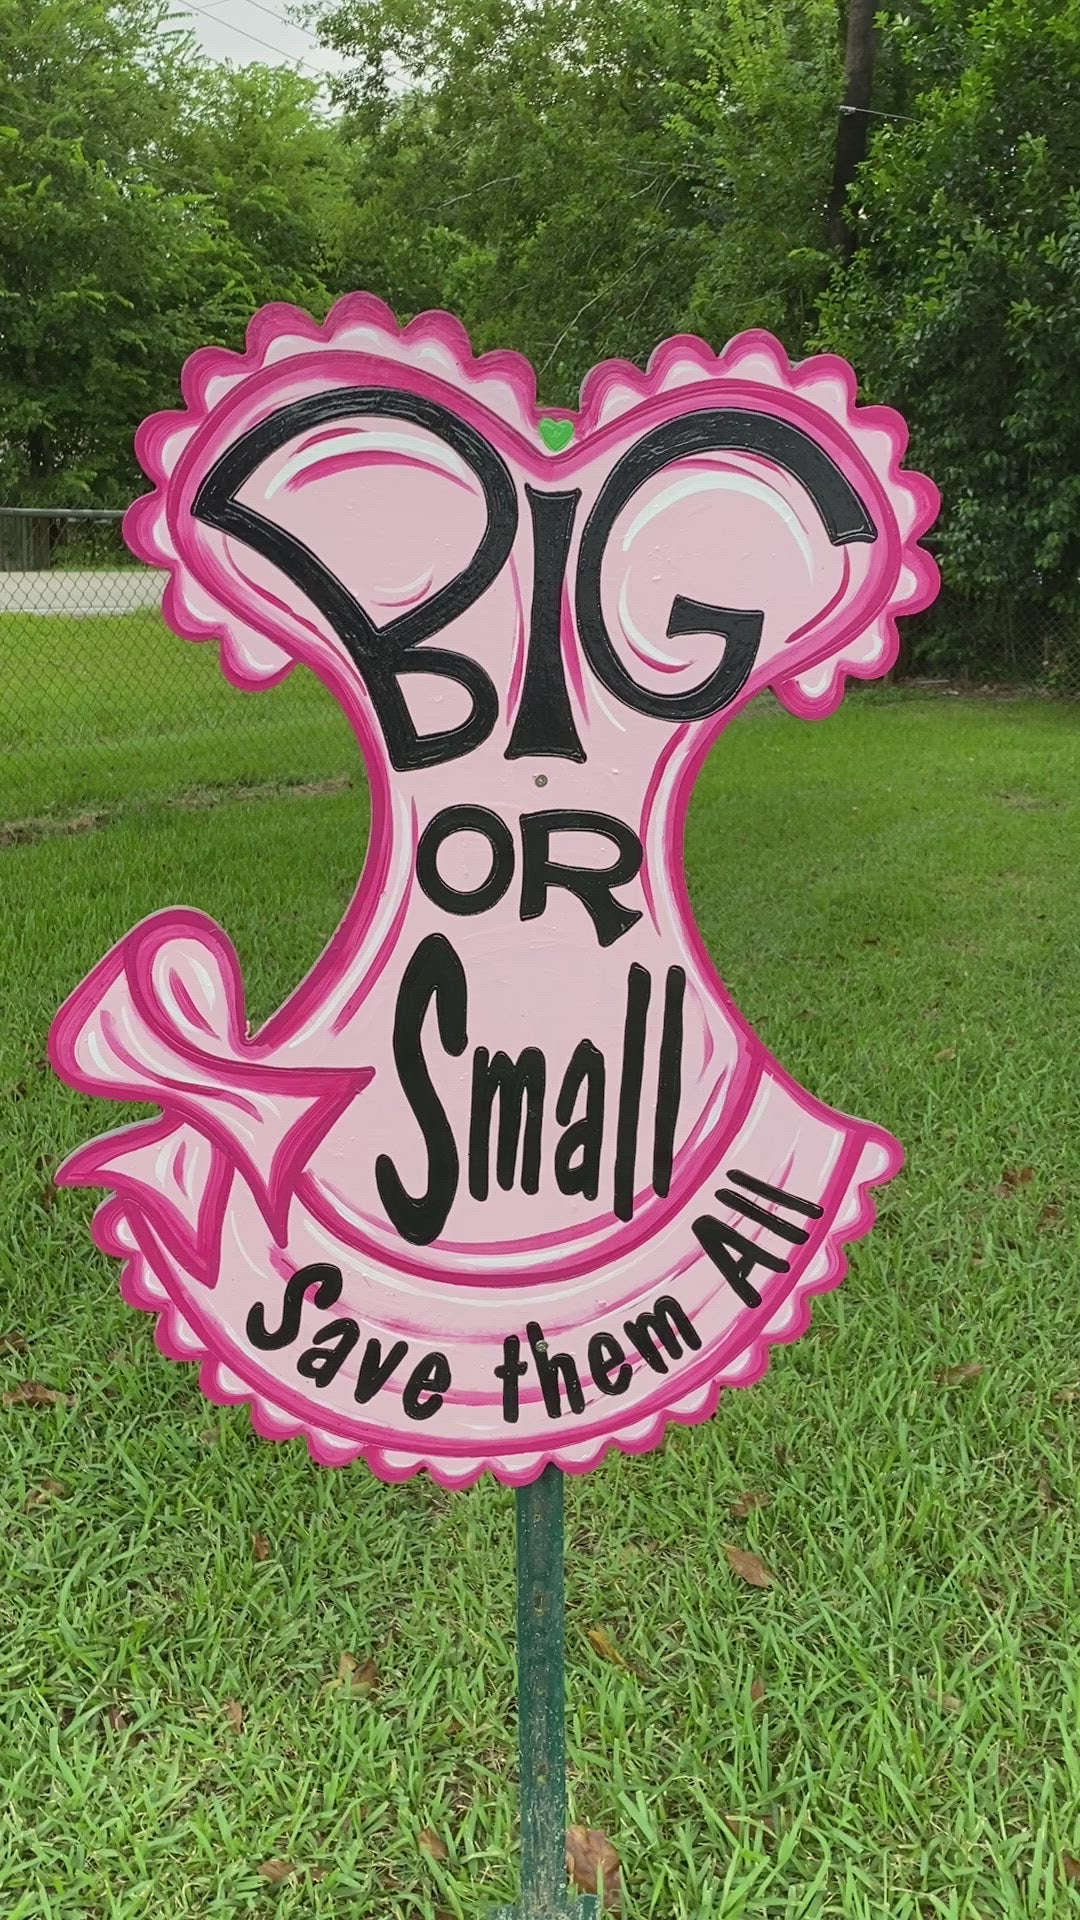 Breast Cancer Big Or Small Save Them All